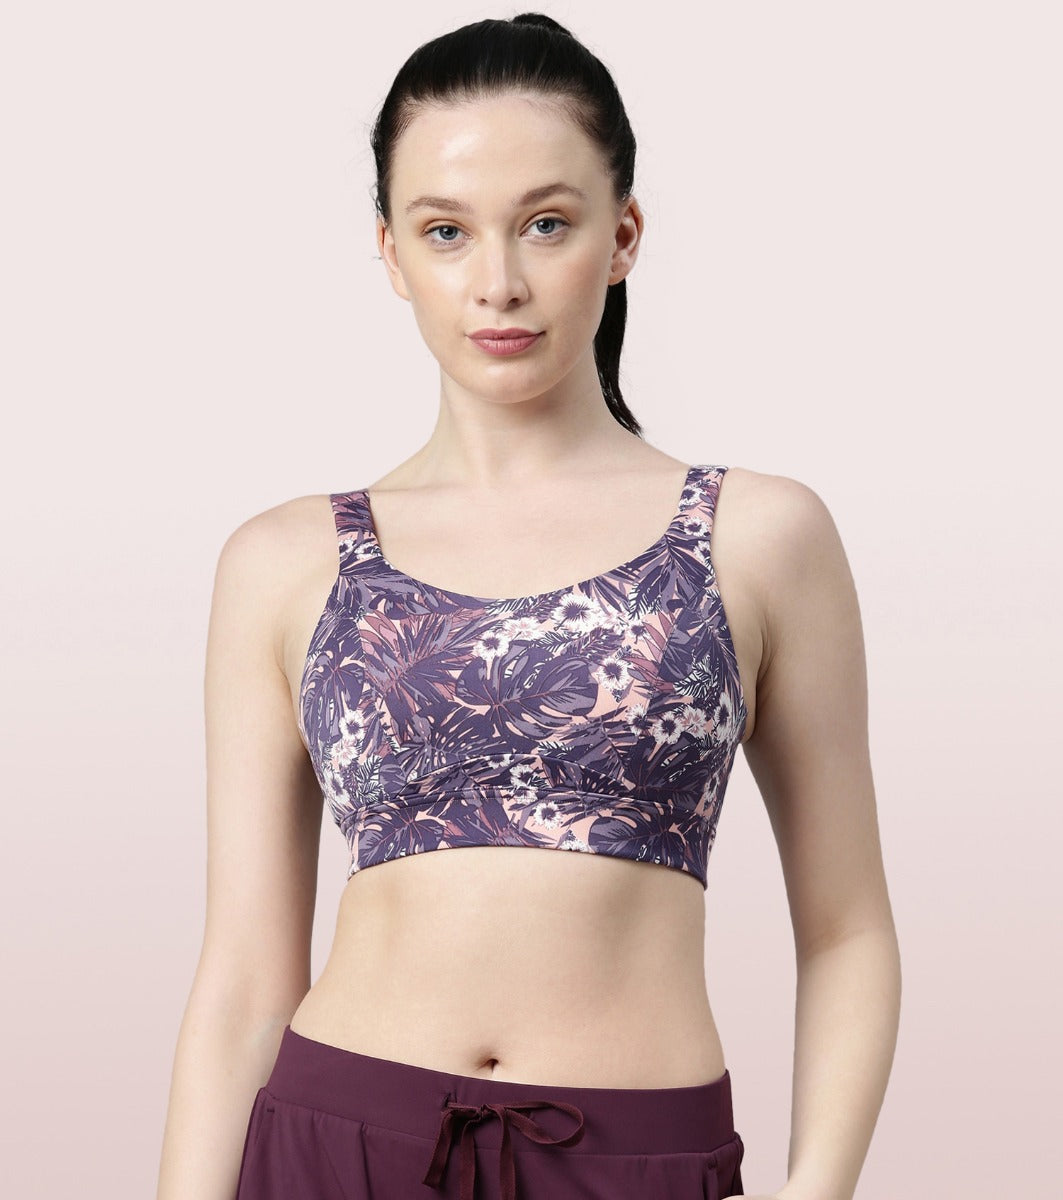 Enamor SB16 Low Impact Cotton Sports Bra - Non-Padded Wirefree - Light Pink  XL in Surat at best price by Jockey Surat - Justdial